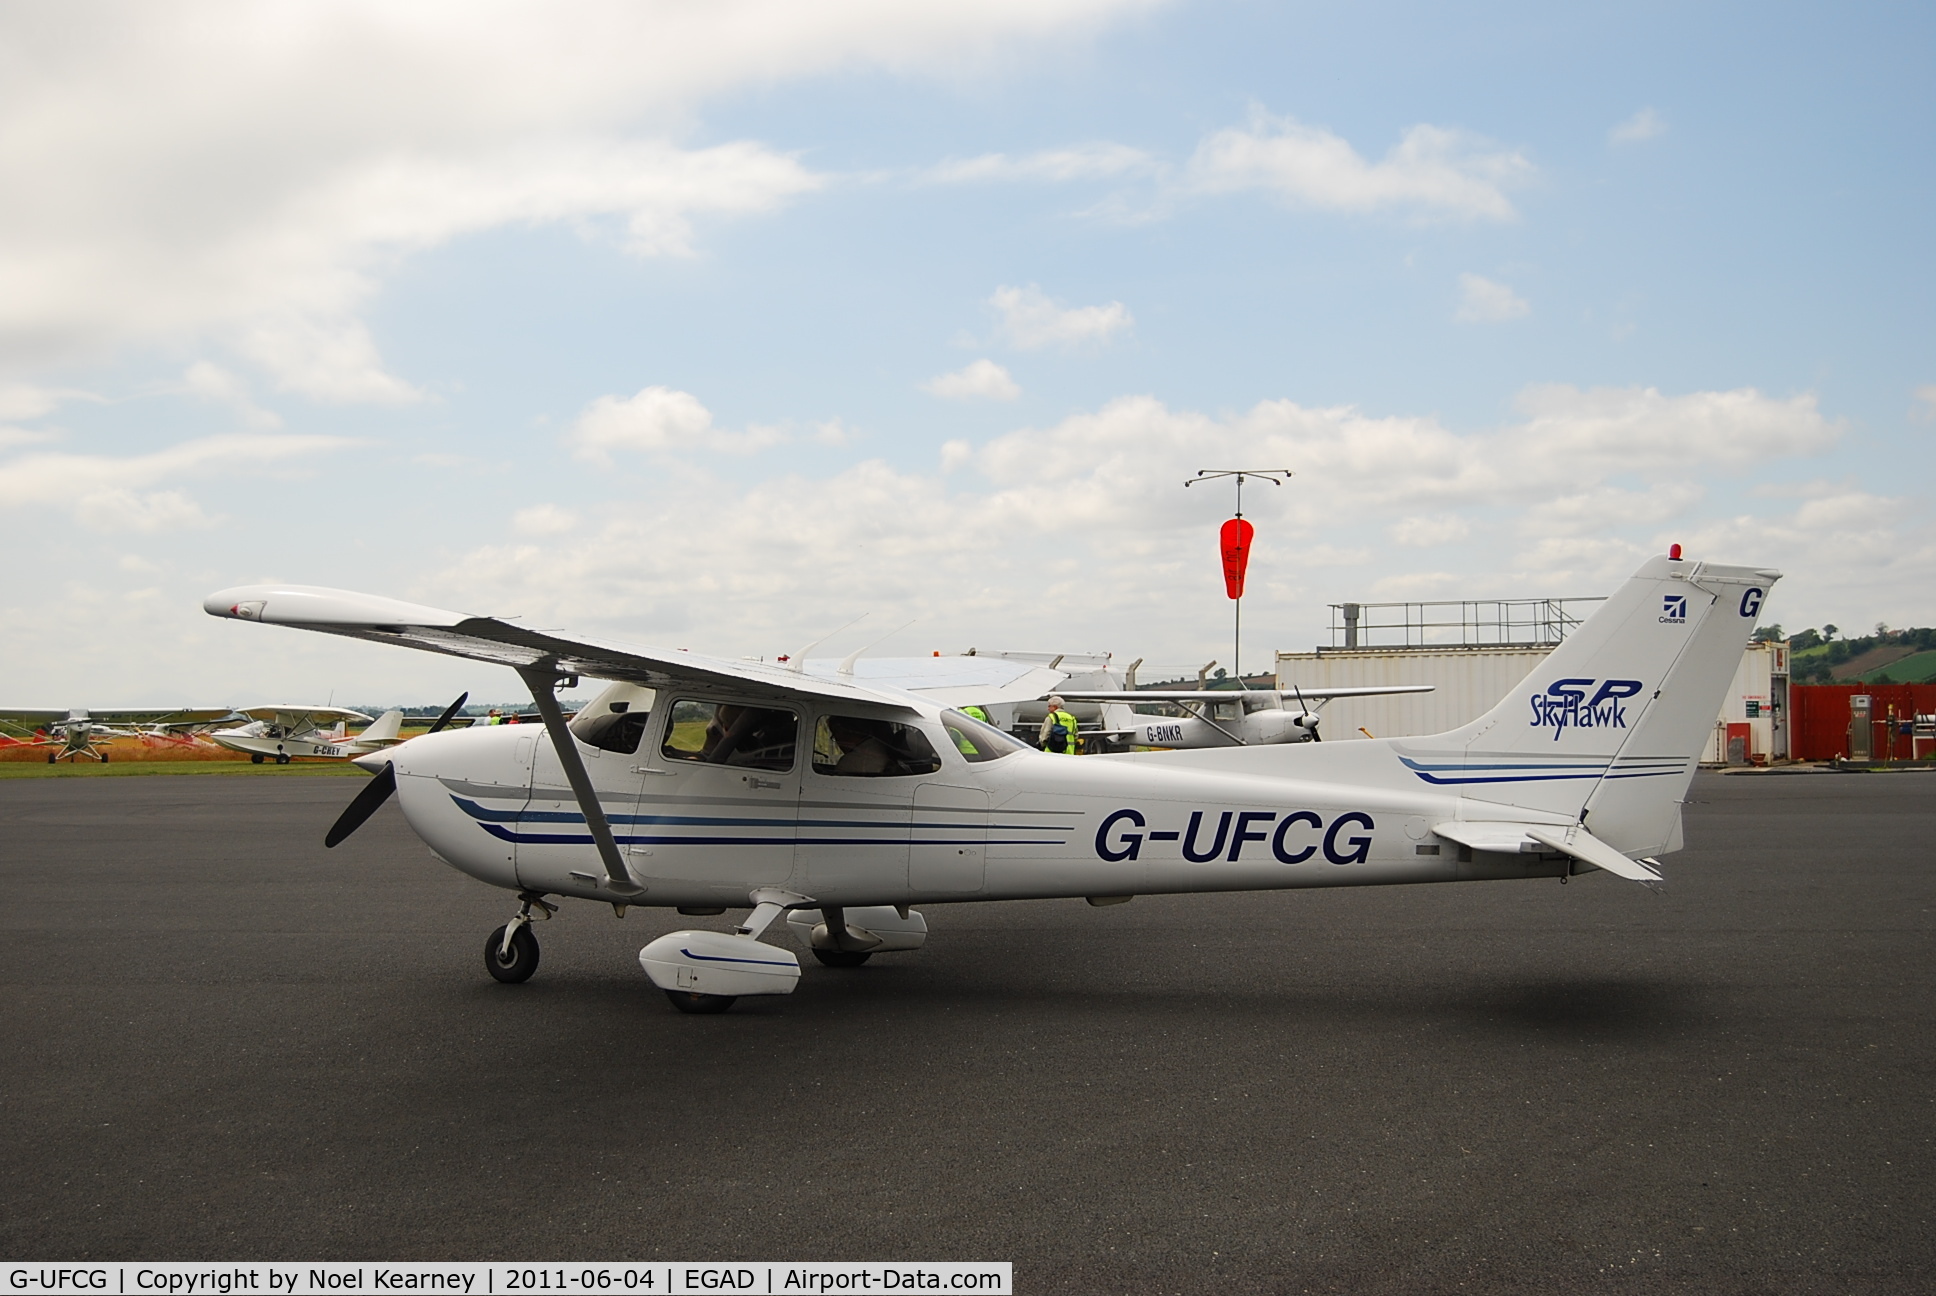 G-UFCG, 2003 Cessna 172S C/N 172S9450, Parked on the apron at Newtownards Airfield.